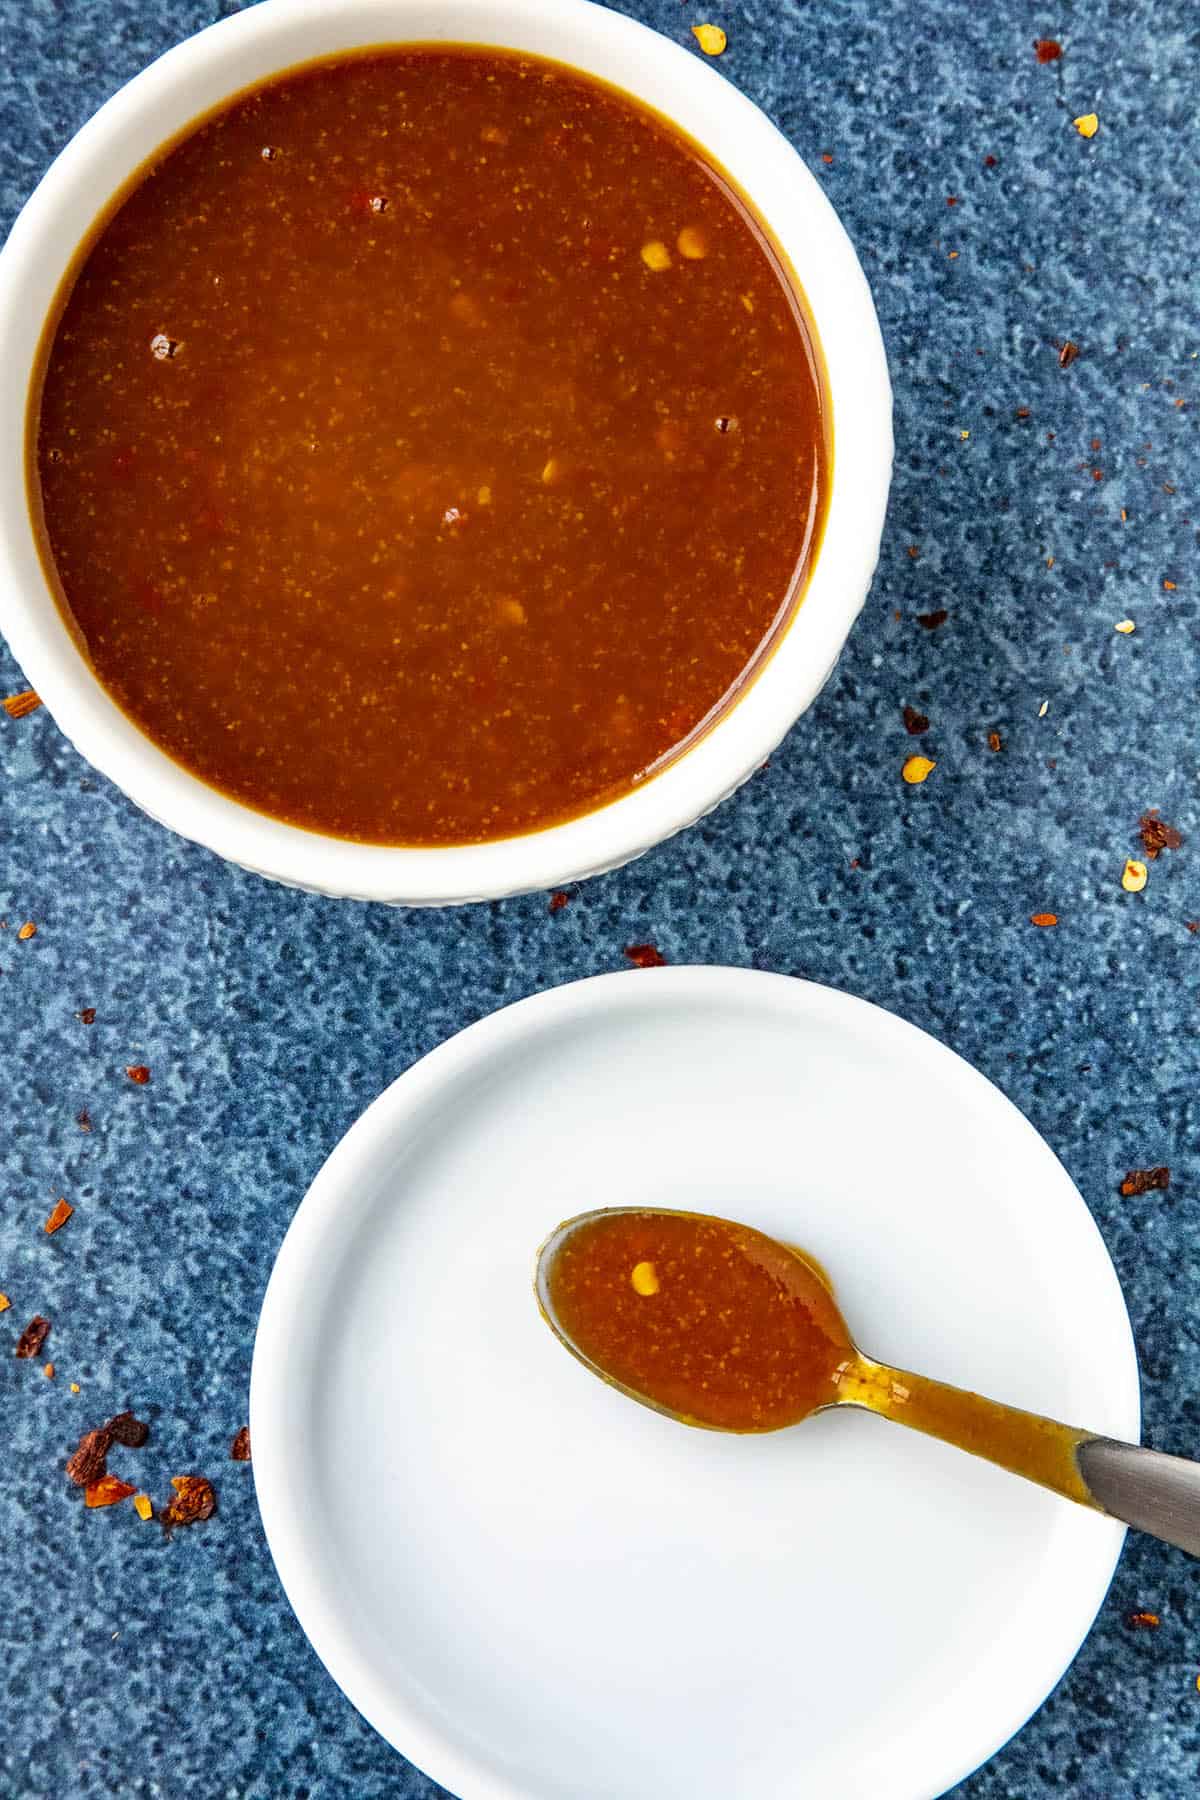 A spoon ful of Szechuan Sauce for tasting